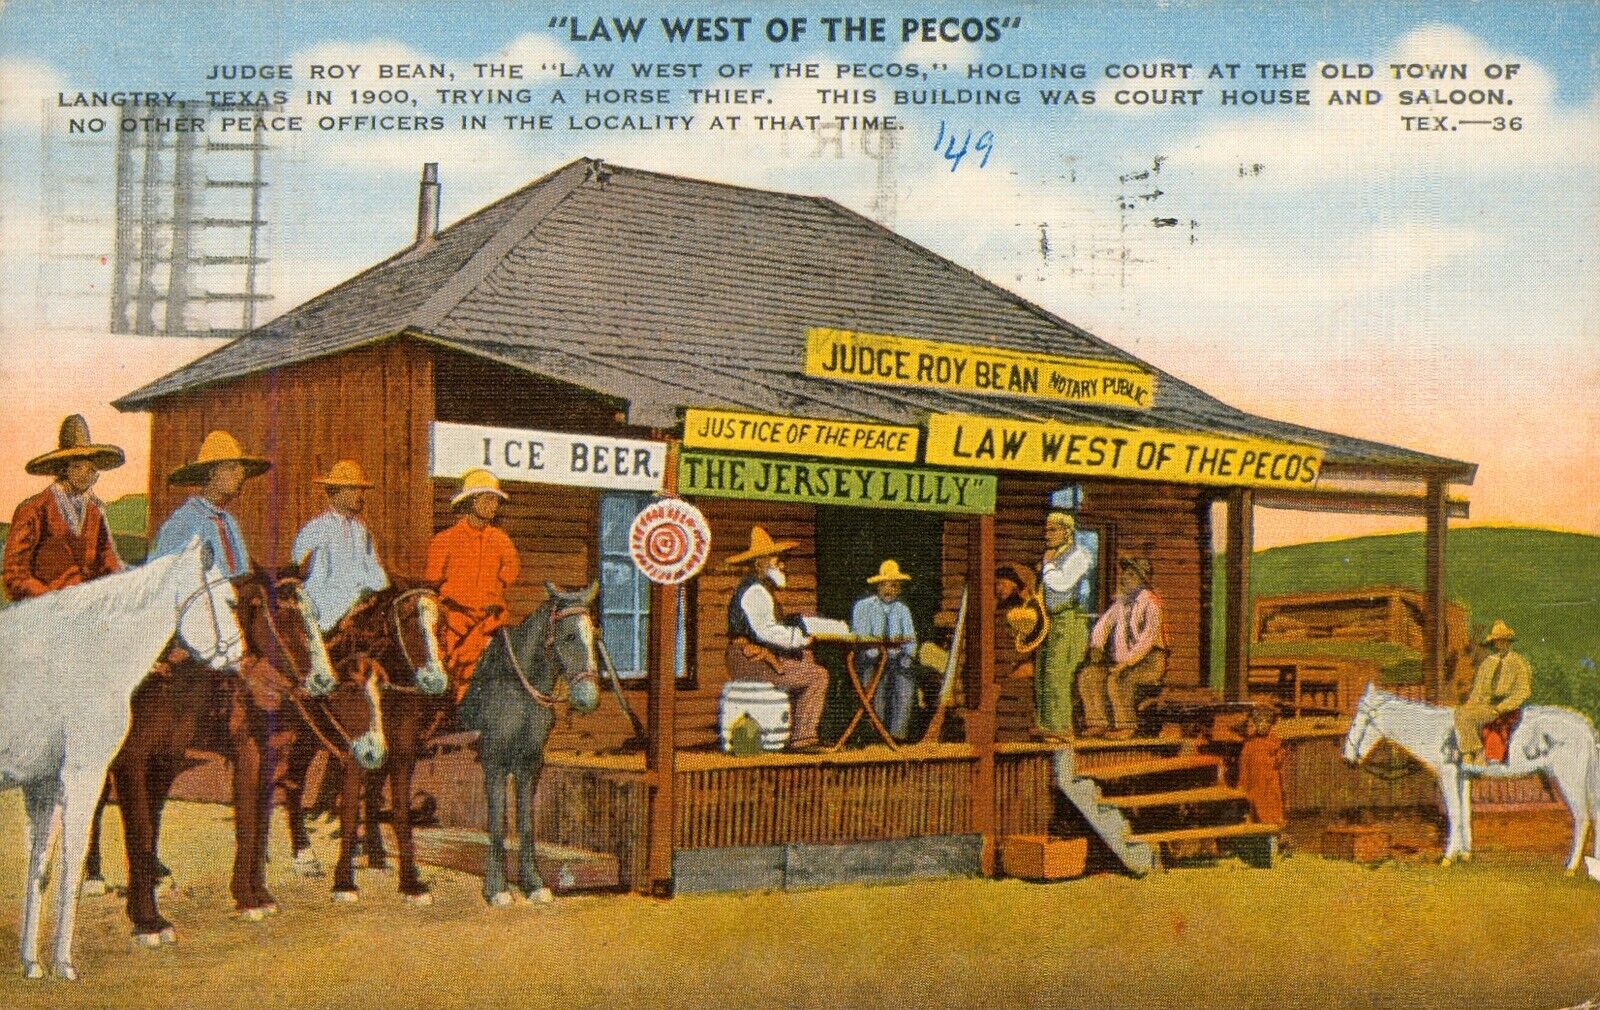 1949 Vintage Postcard TEXAS Judge Roy Bean LAW WEST OF THE PECOS Justice Peace